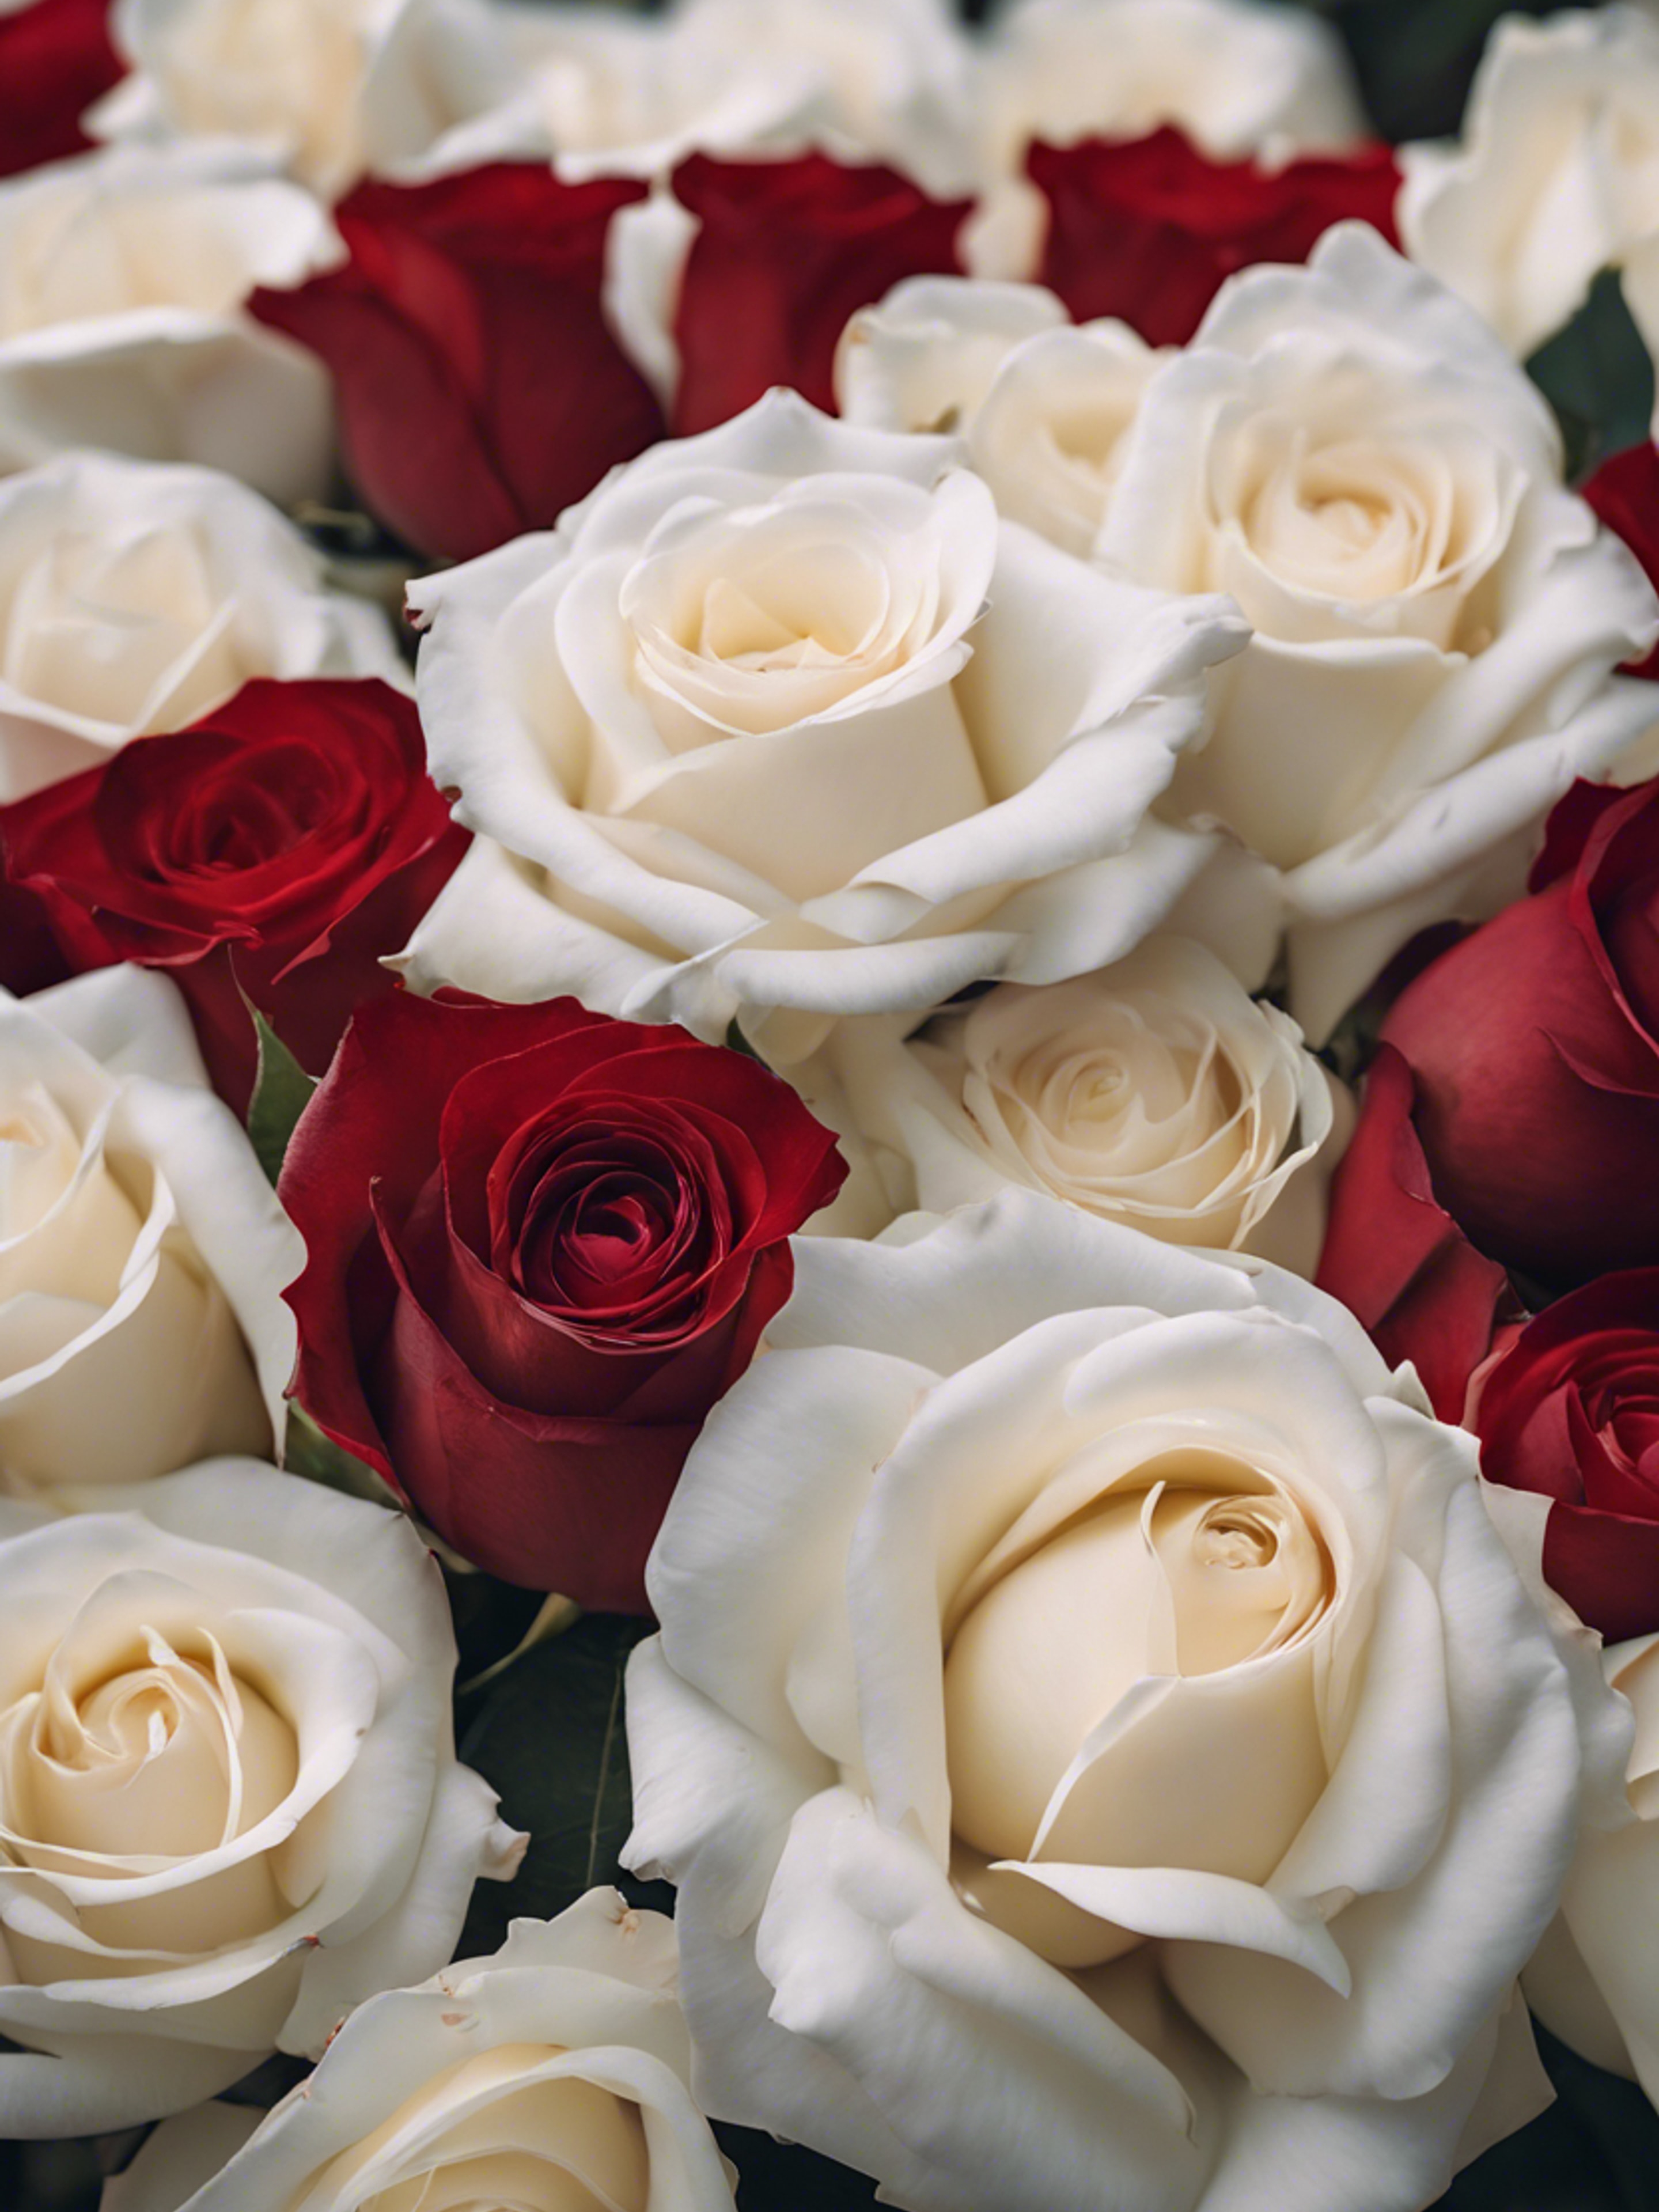 A cluster of white roses with a single red rose nestled in the middle. ورق الجدران[ffa8b13685ab483b9eca]